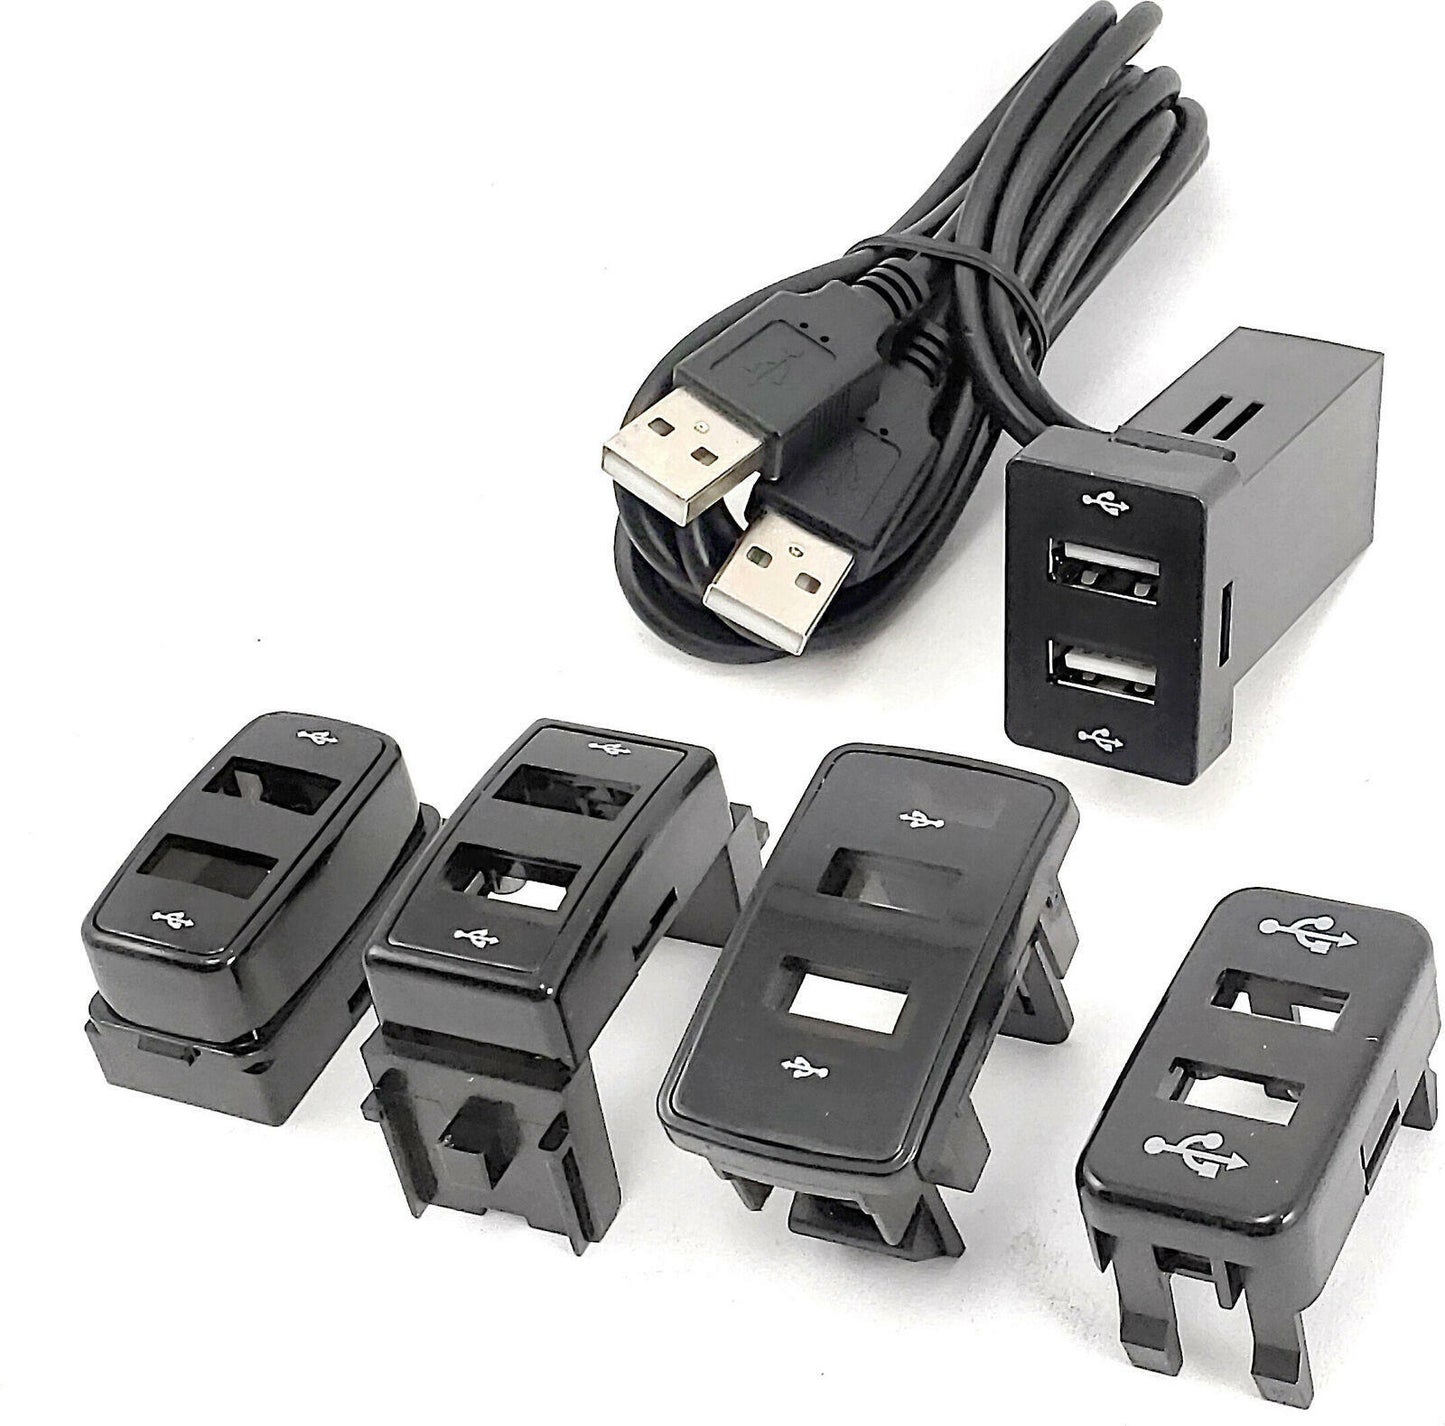 Accele Electronic USBD-KIT Dual 3' USB Cable Extensions w/ Dash Mounts